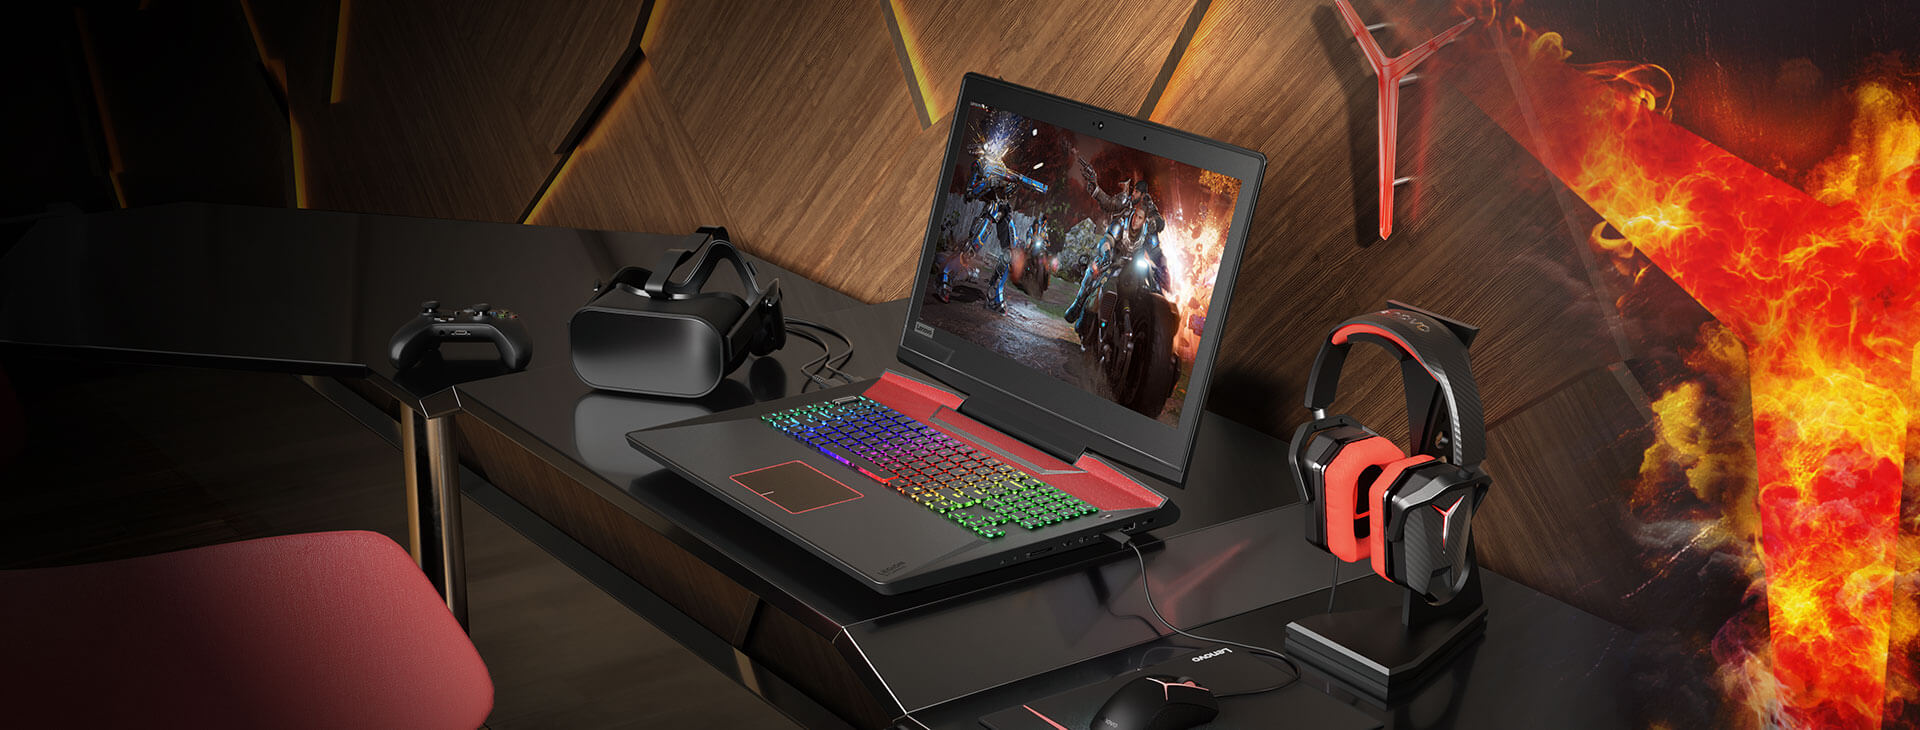 Read more about the article What You Need to Know About Gaming Laptop Specs